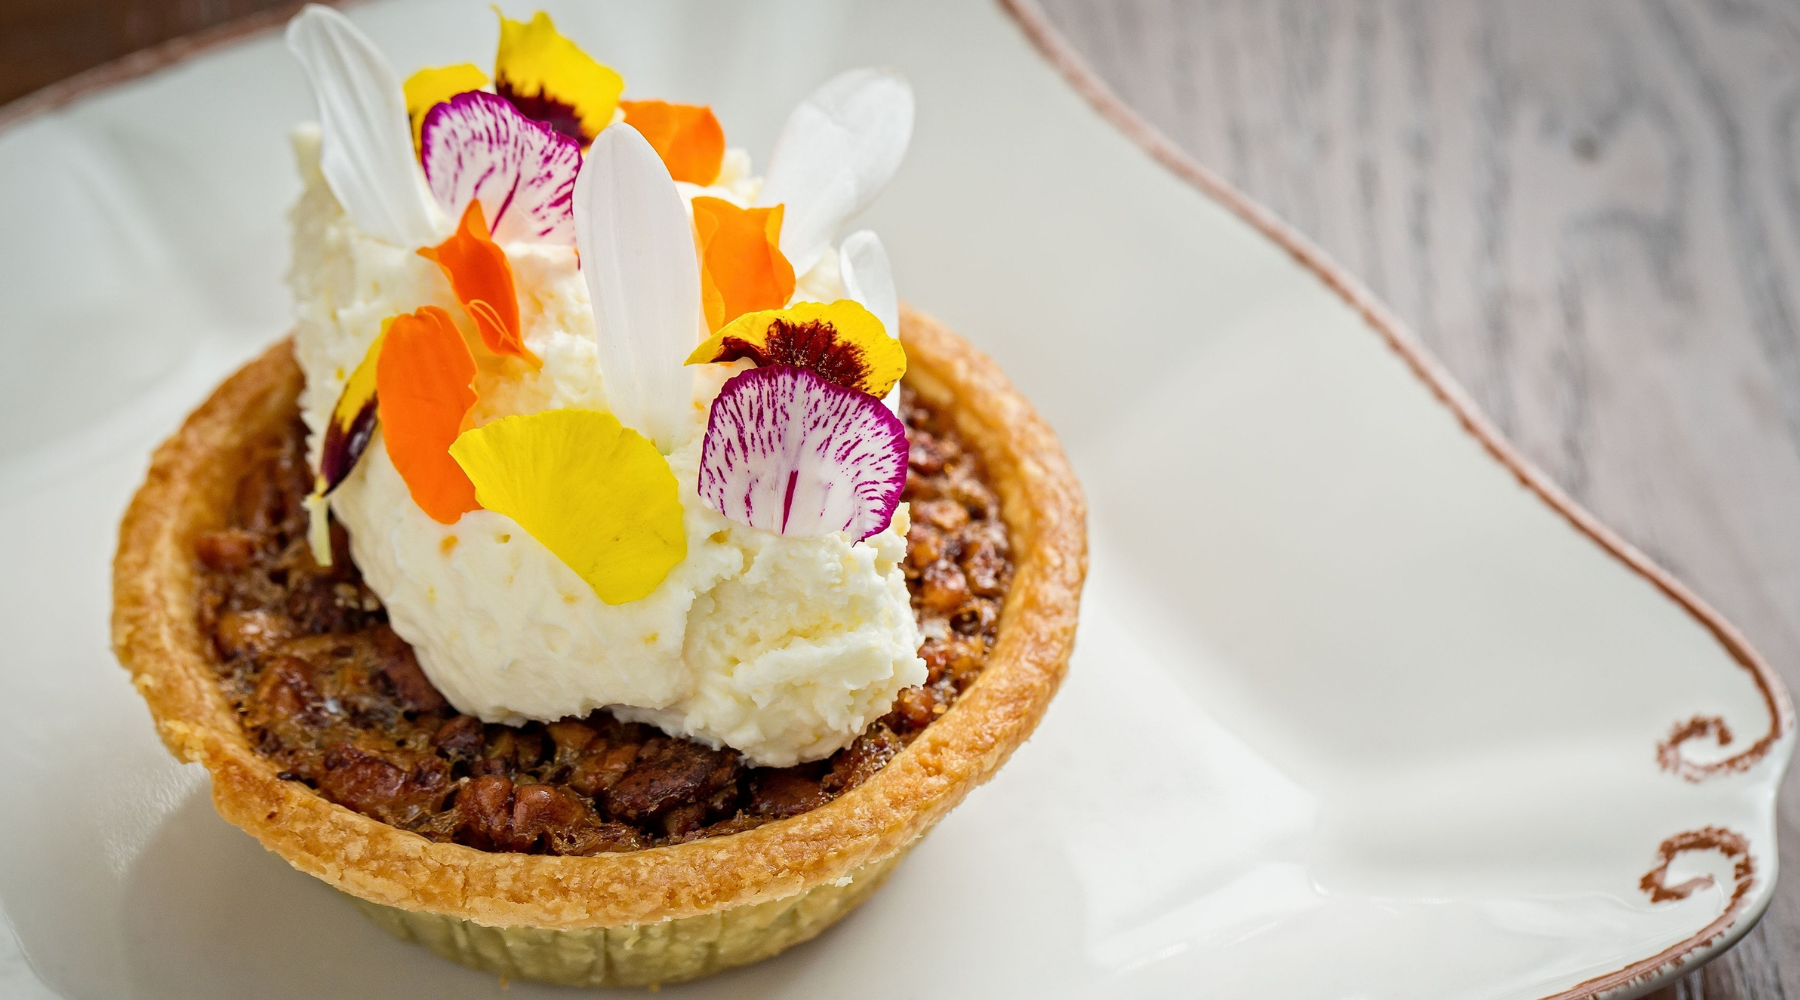 Mini pecan pie topped with ice cream and flower petals